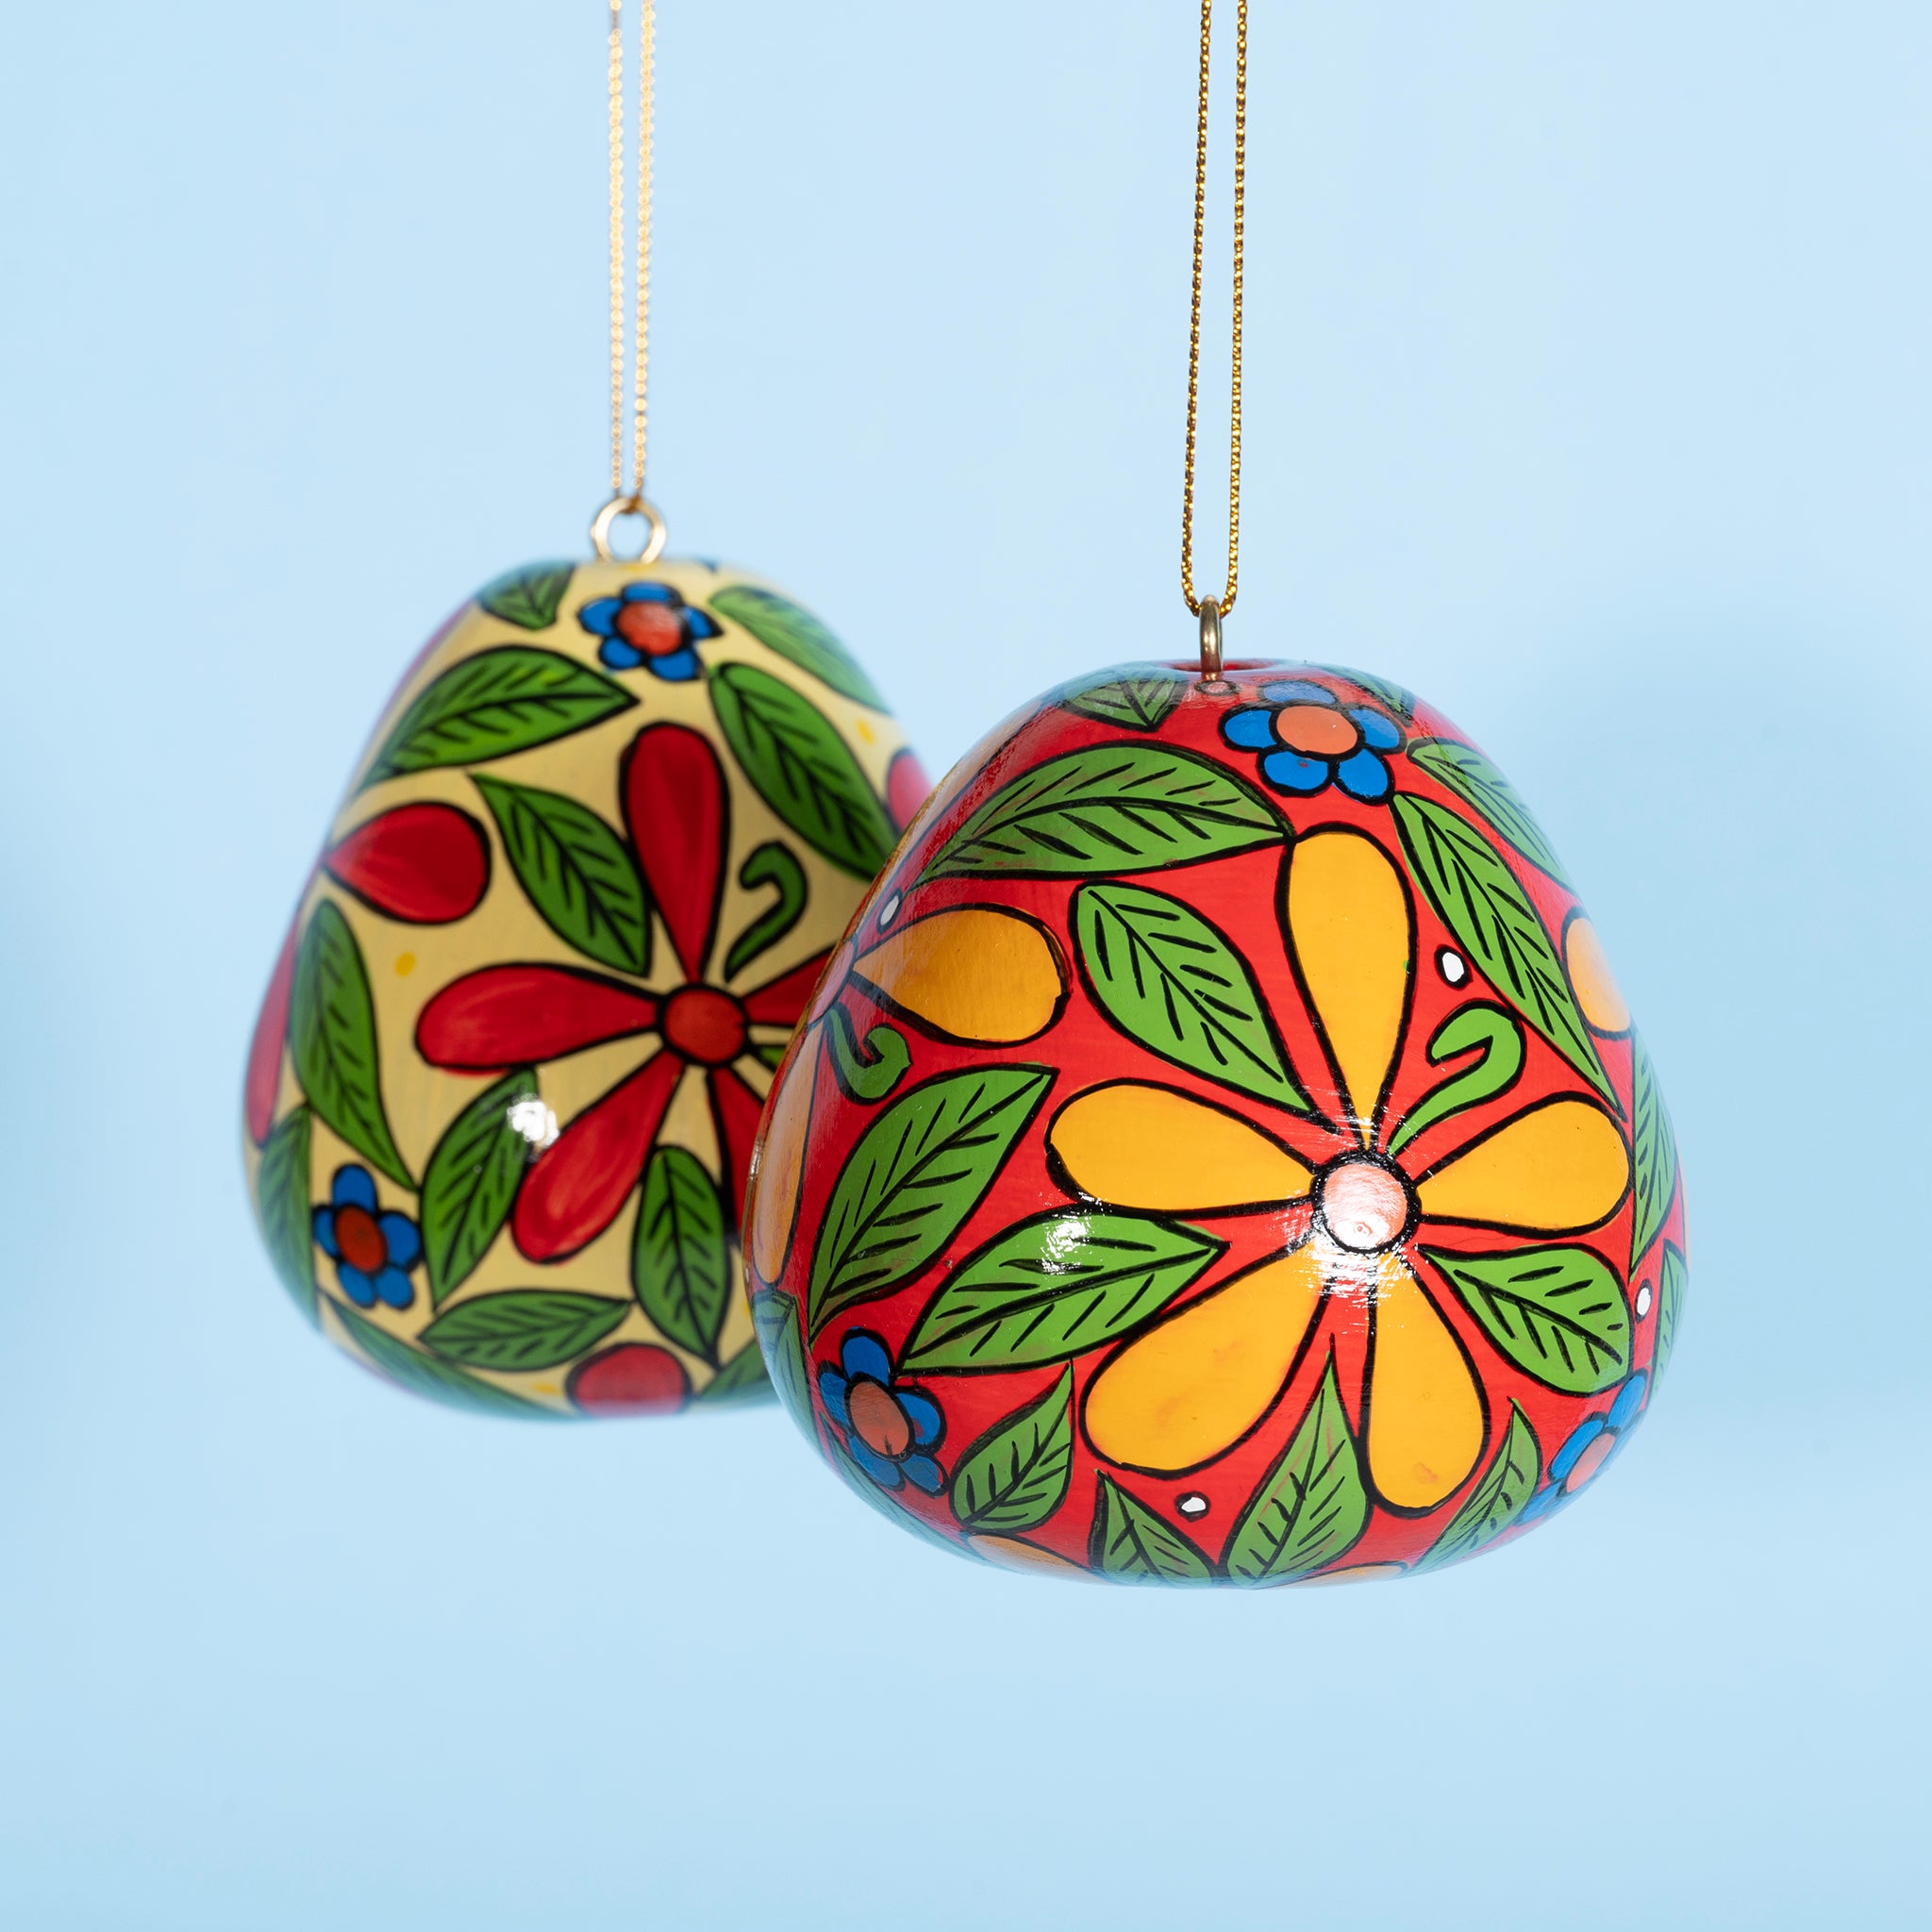 Flowers - Painted Gourd Ornament